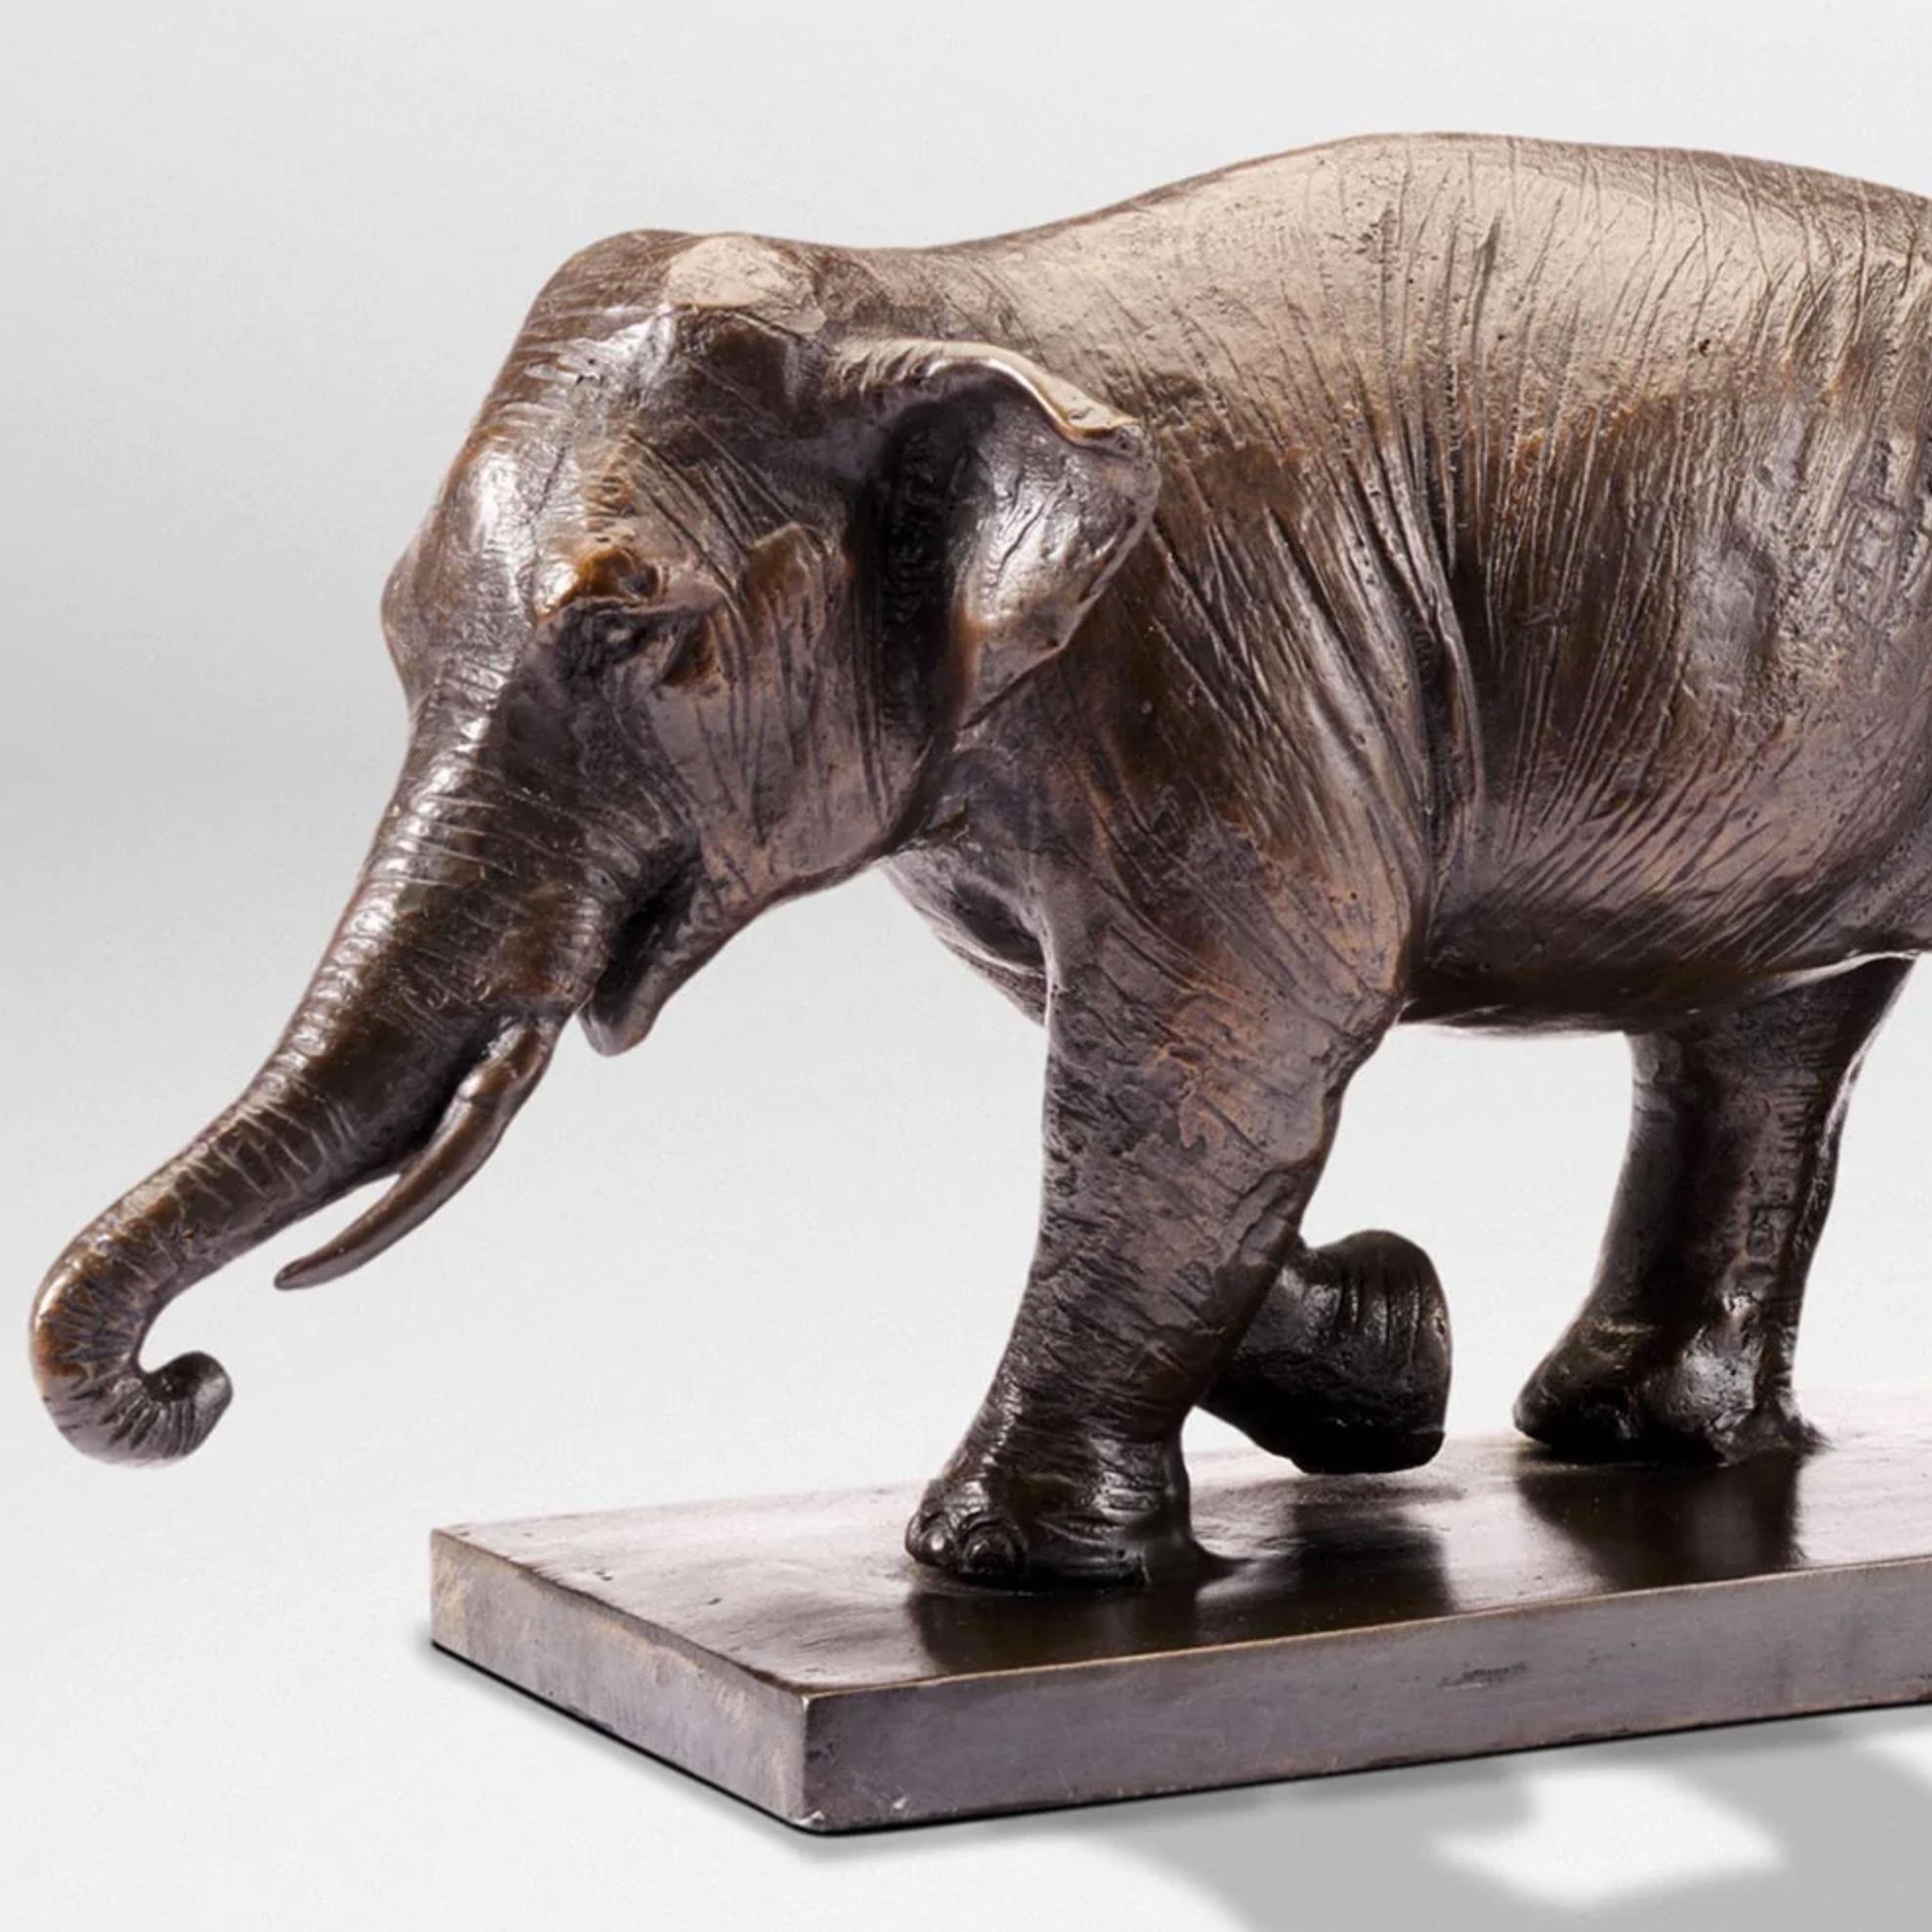 Title: Love The Indian Elephant, The Grevy’s Zebra and The Asiatic Black Bear 
Authentic Bronze Sculpture

This authentic bronze sculpture titled 'Love The Indian Elephant, The Grevy’s Zebra and The Asiatic Black Bear ' by artists Gillie and Marc